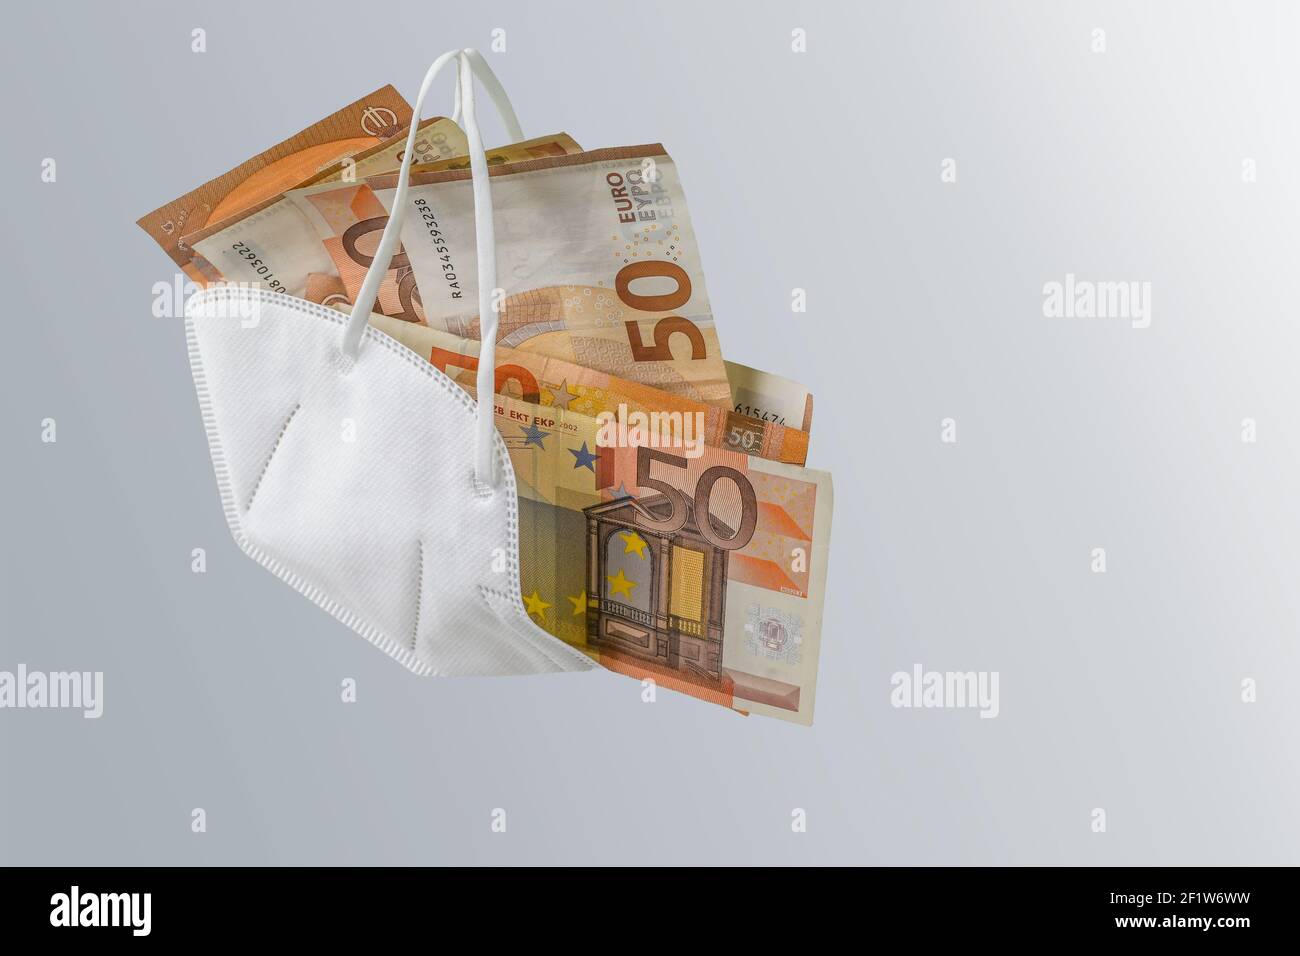 Medical ffp2 face mask against covid-19 virus filled with euro banknotes, concept for enrichment by corruption or rising costs of health care in pande Stock Photo